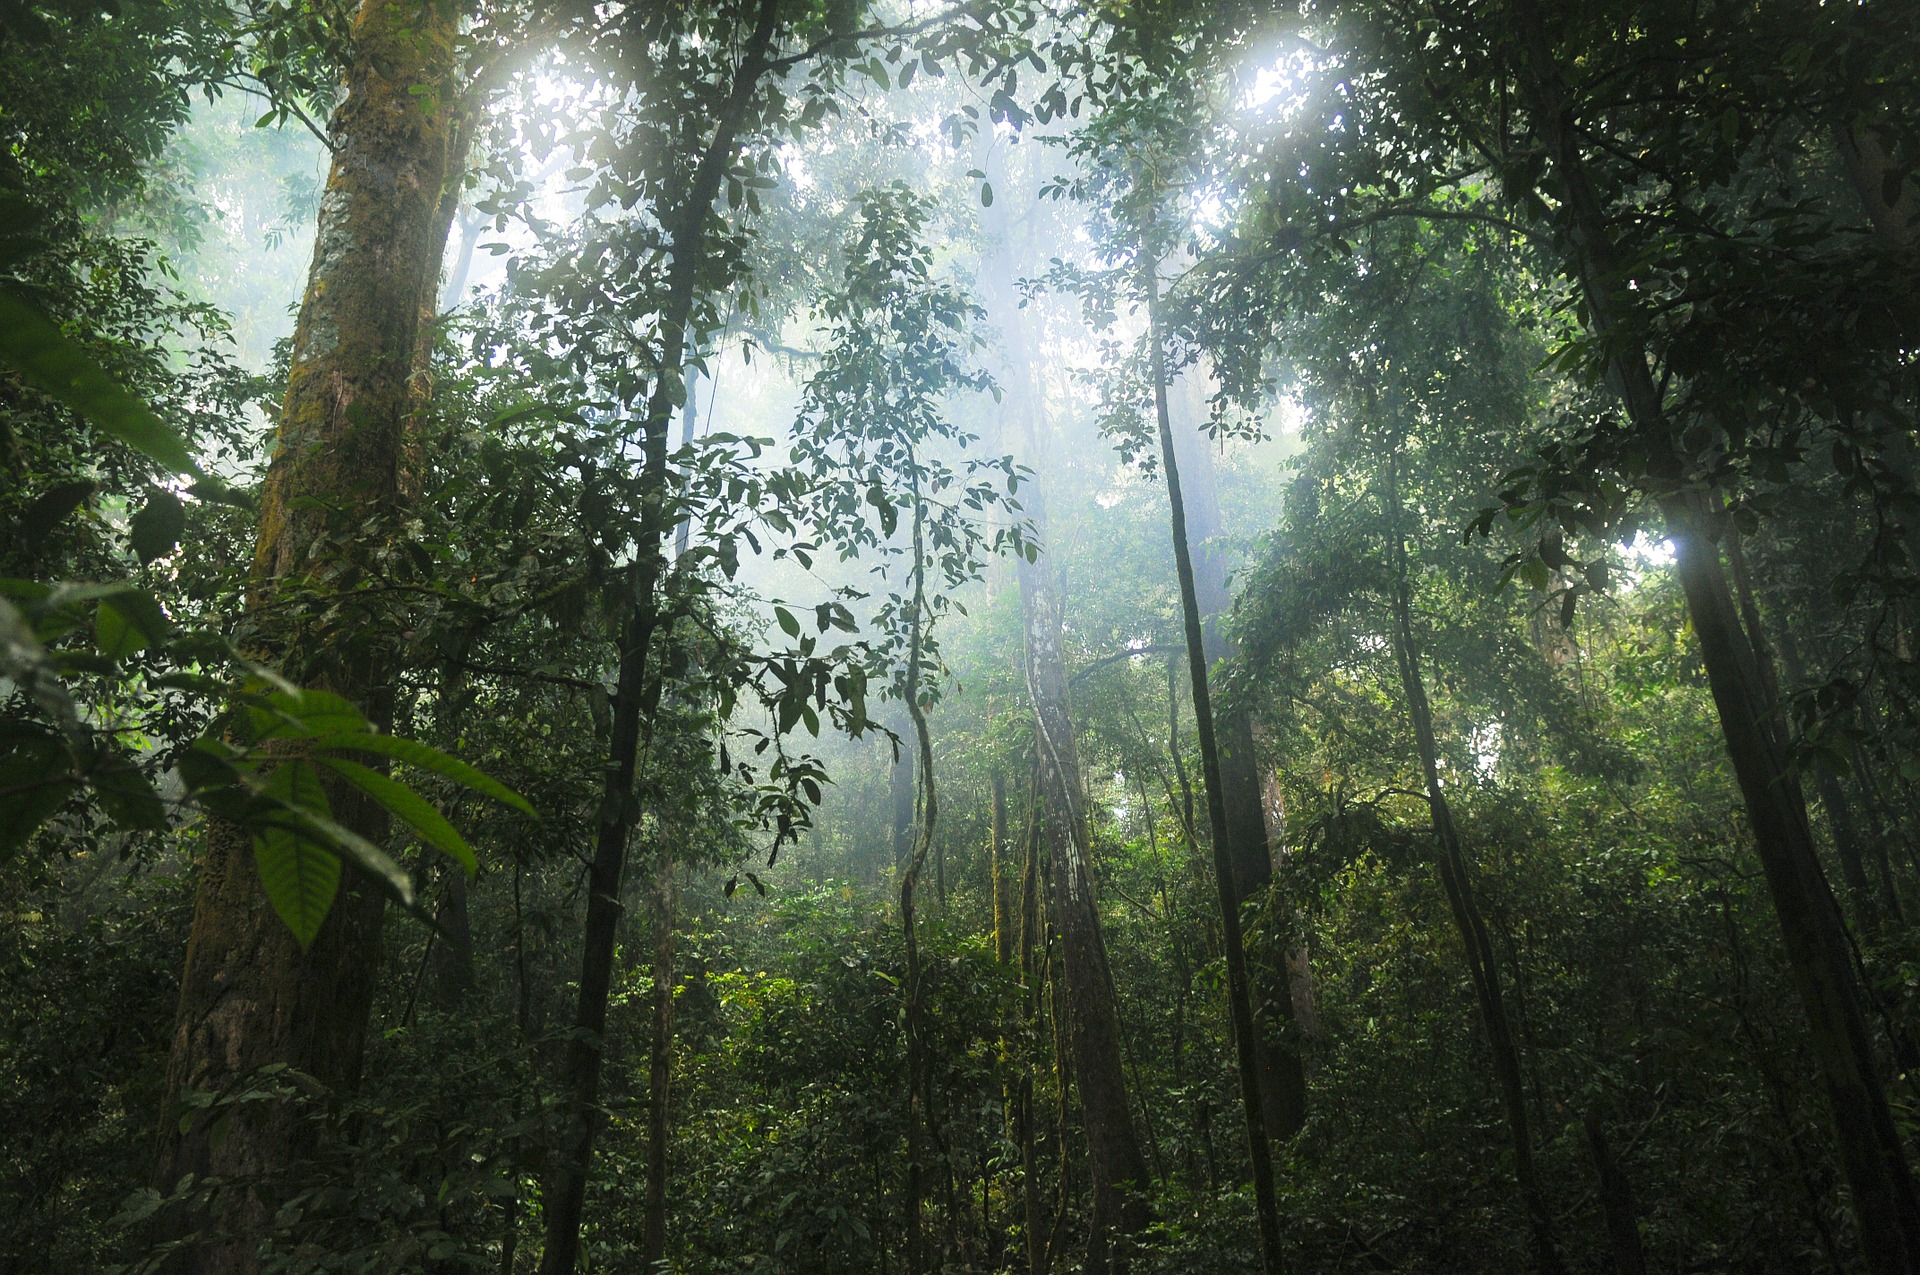 A dense forest. The trees are covered in vegetation.